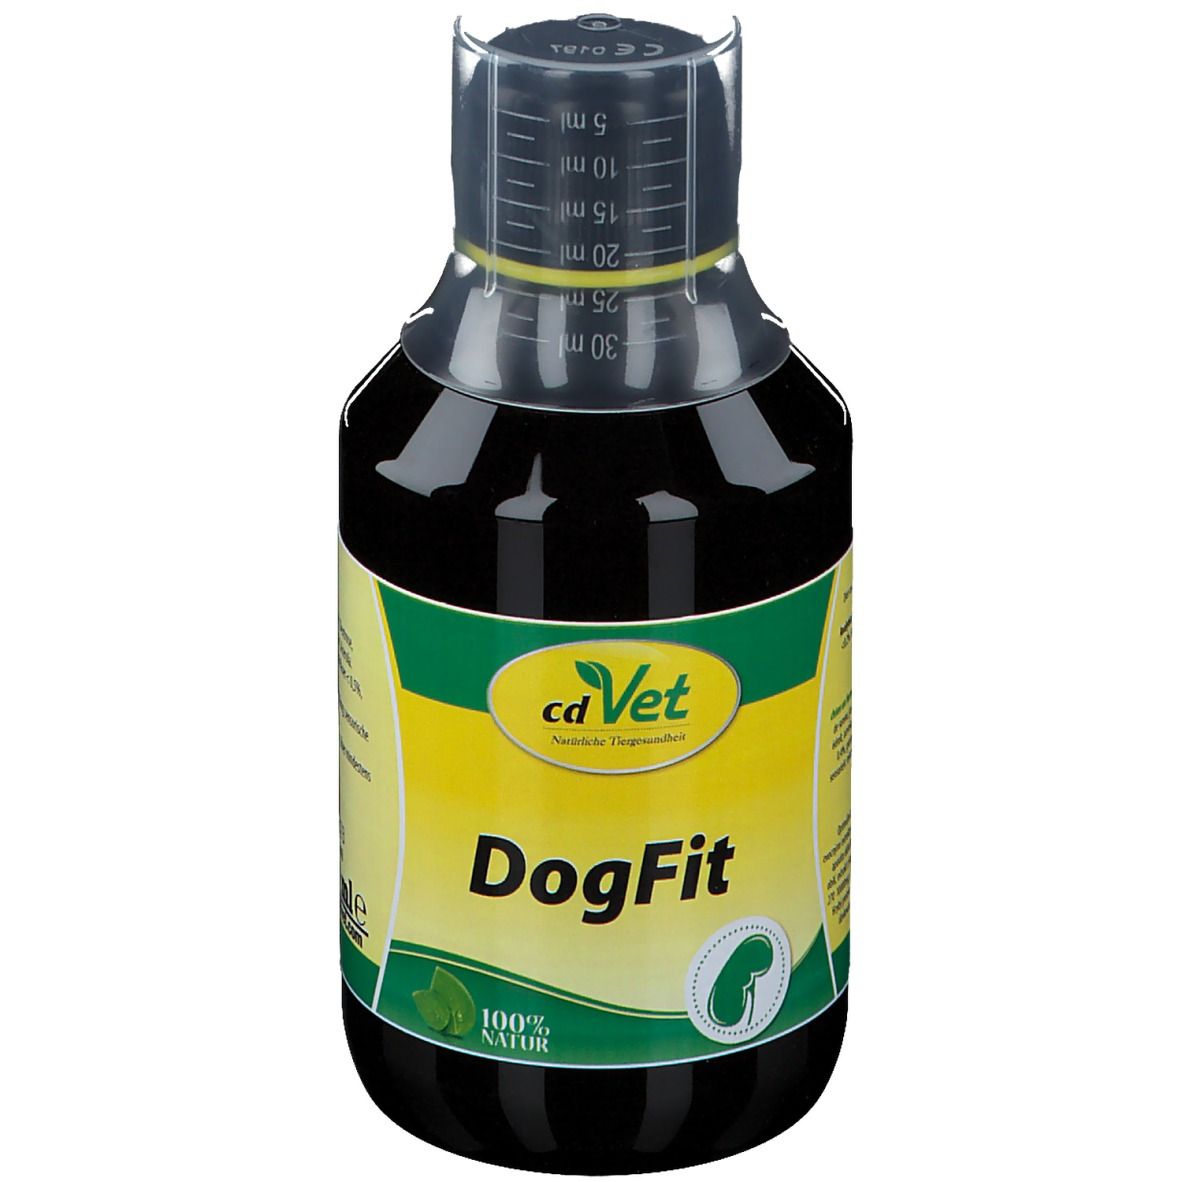 Image of cd Vet DogFit